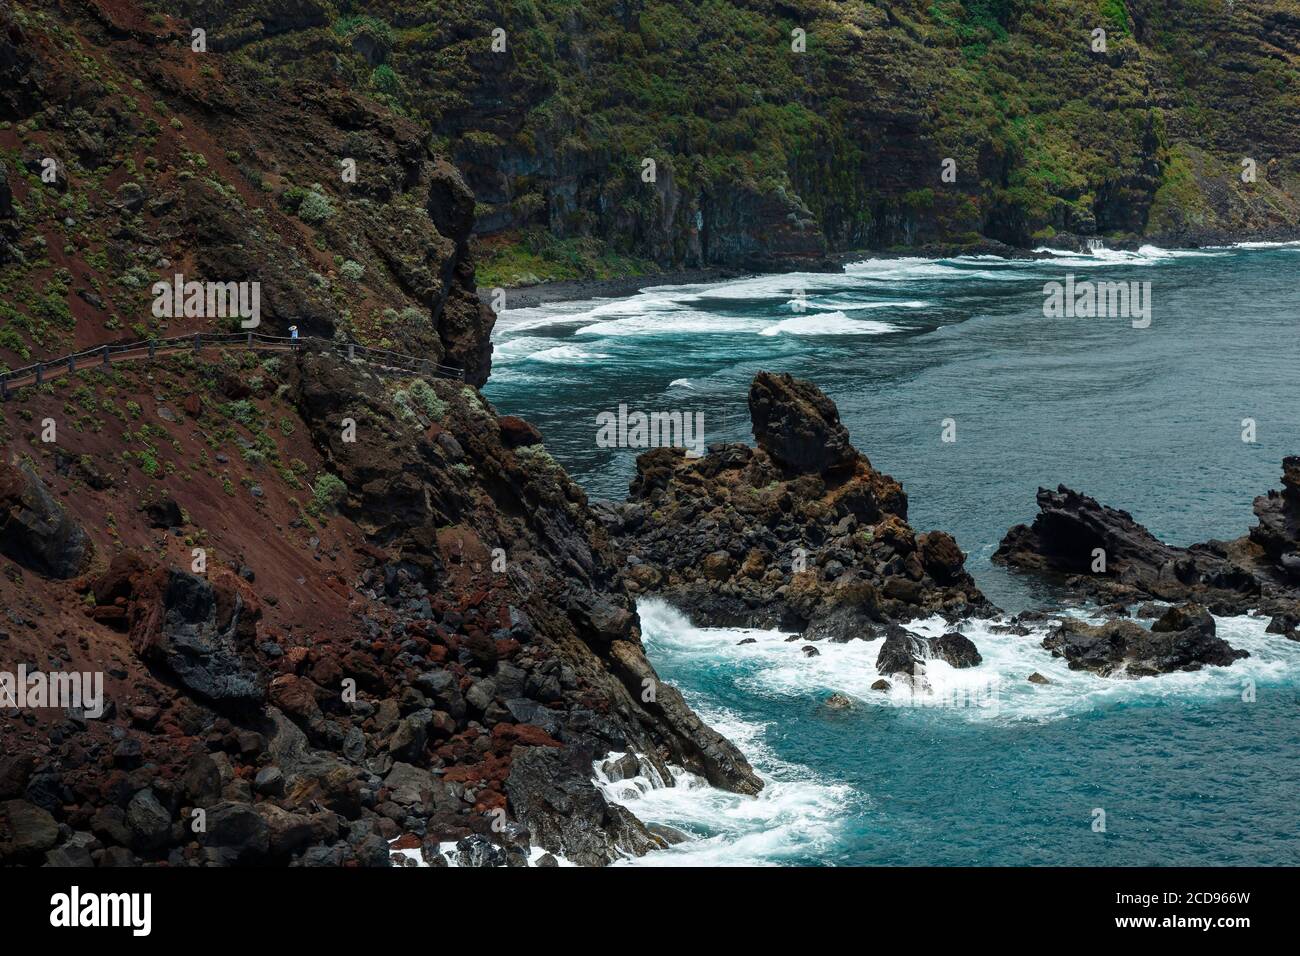 Spain, Canary Islands, La Palma, view of a rocky and volcanic coastline under a tropical and oceanic climate Stock Photo